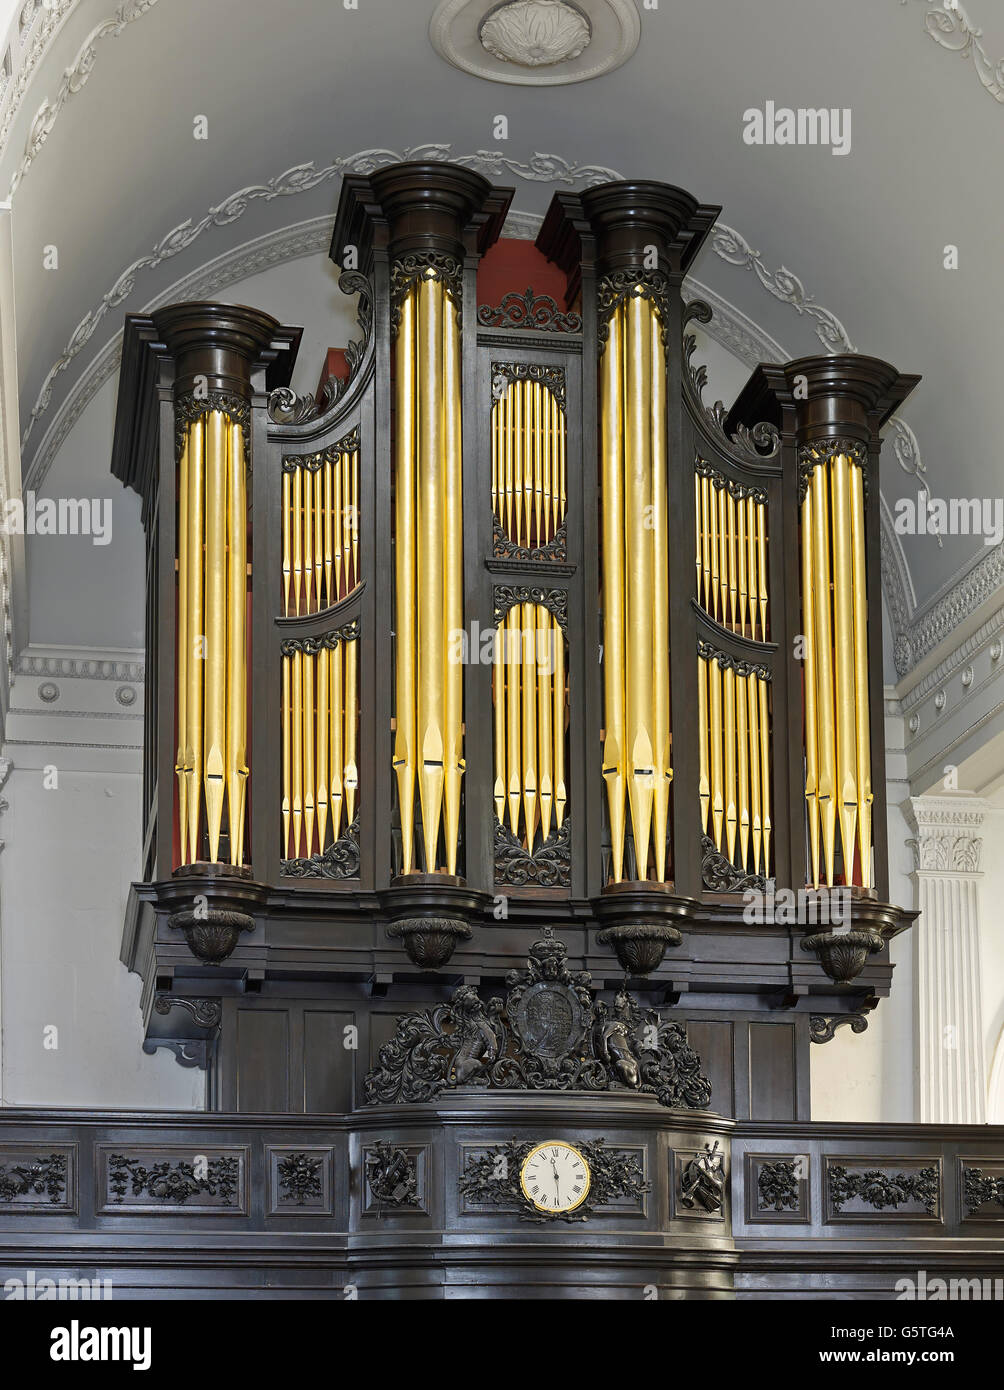 St Mary Hill, Kirche in der City of London, die Orgel Stockfoto